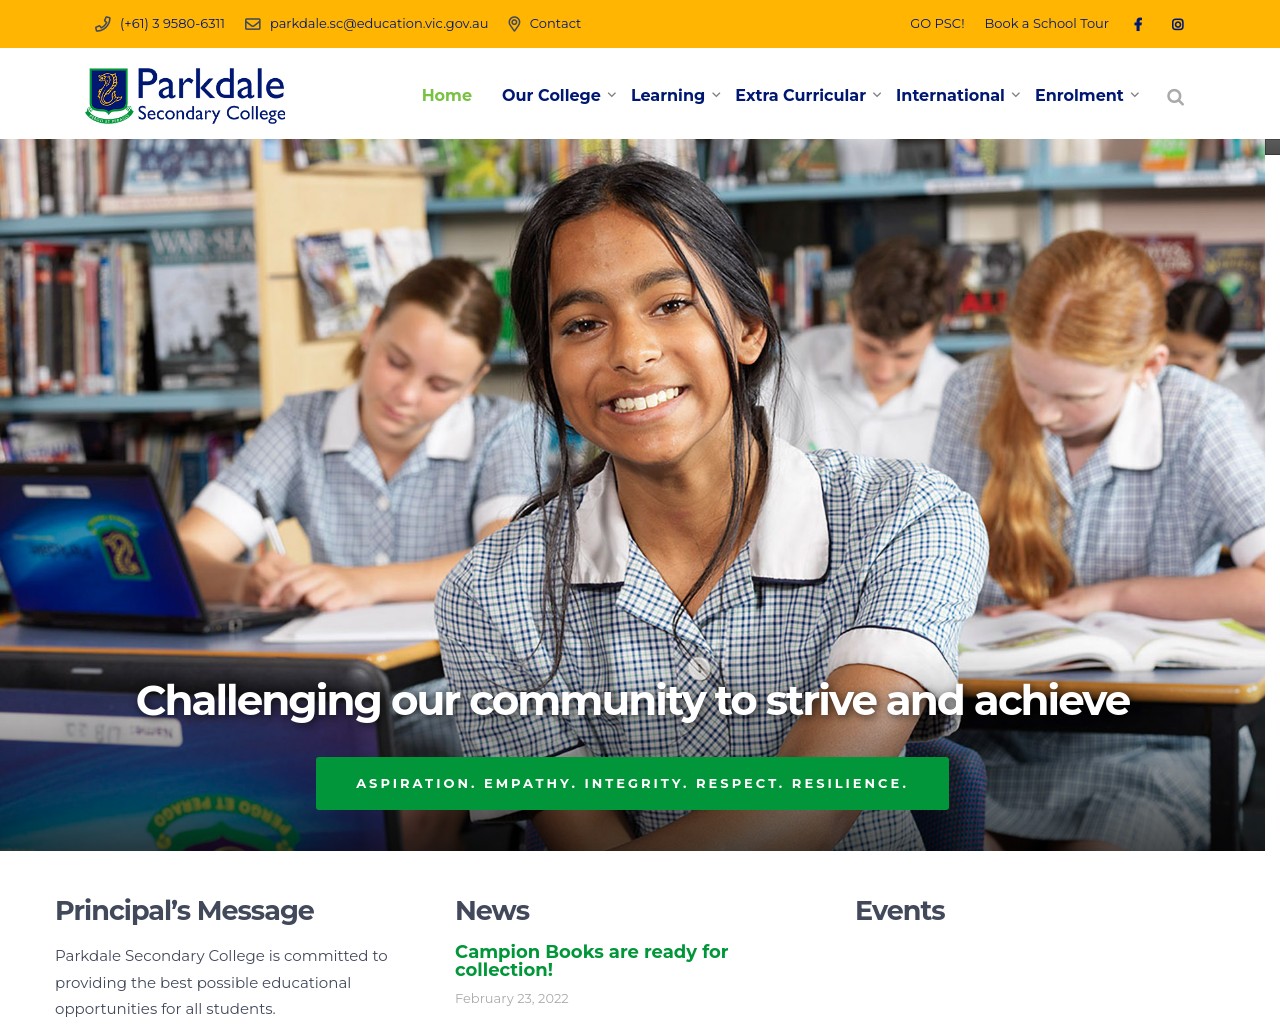 Parkdale Secondary College